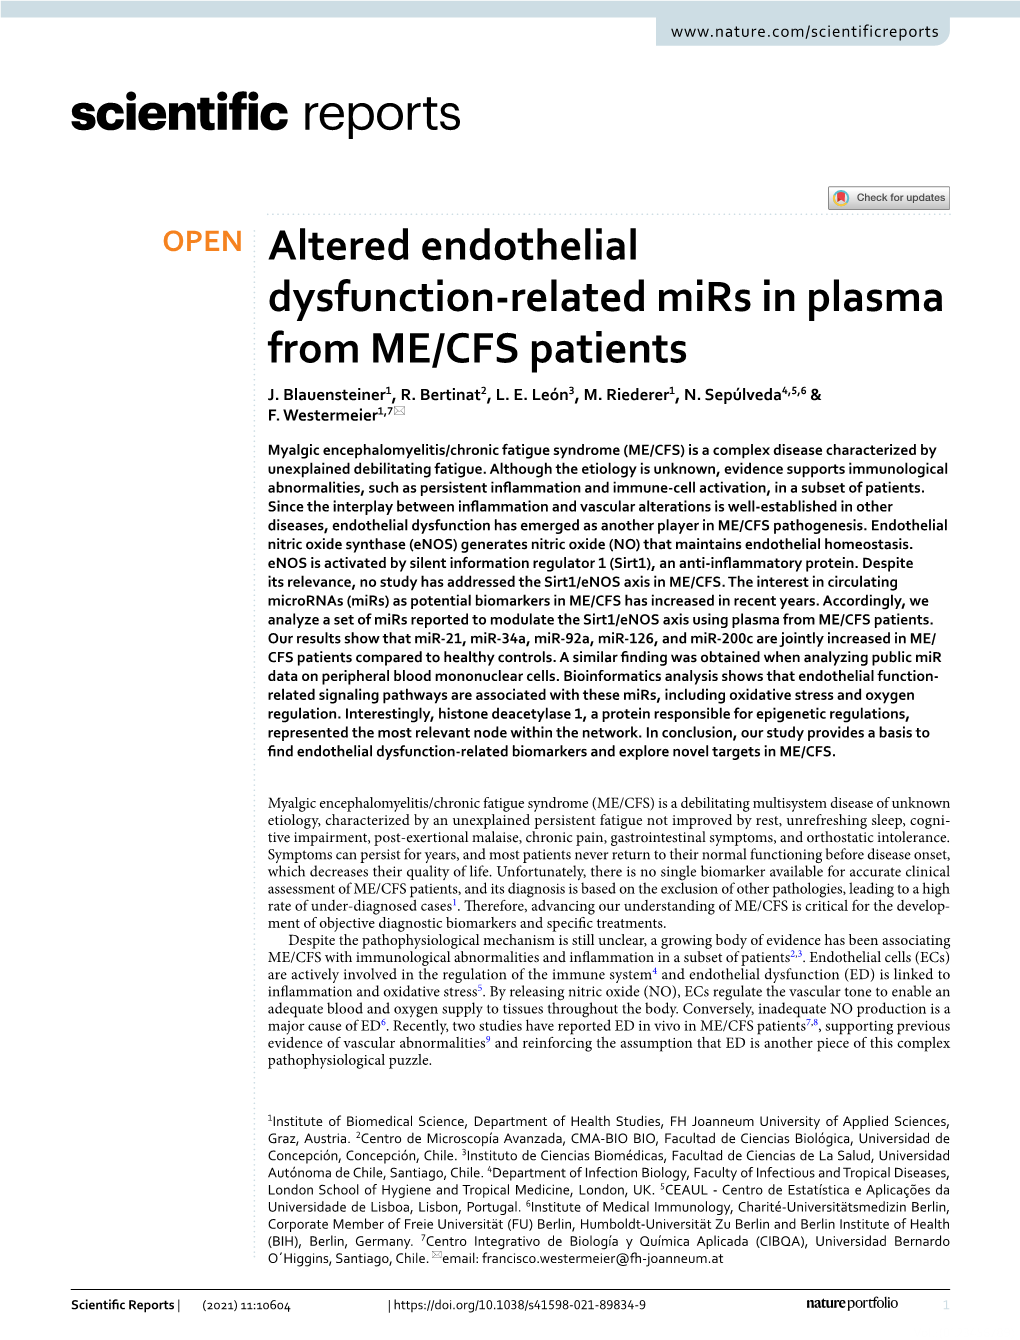 Altered Endothelial Dysfunction-Related Mirs in Plasma